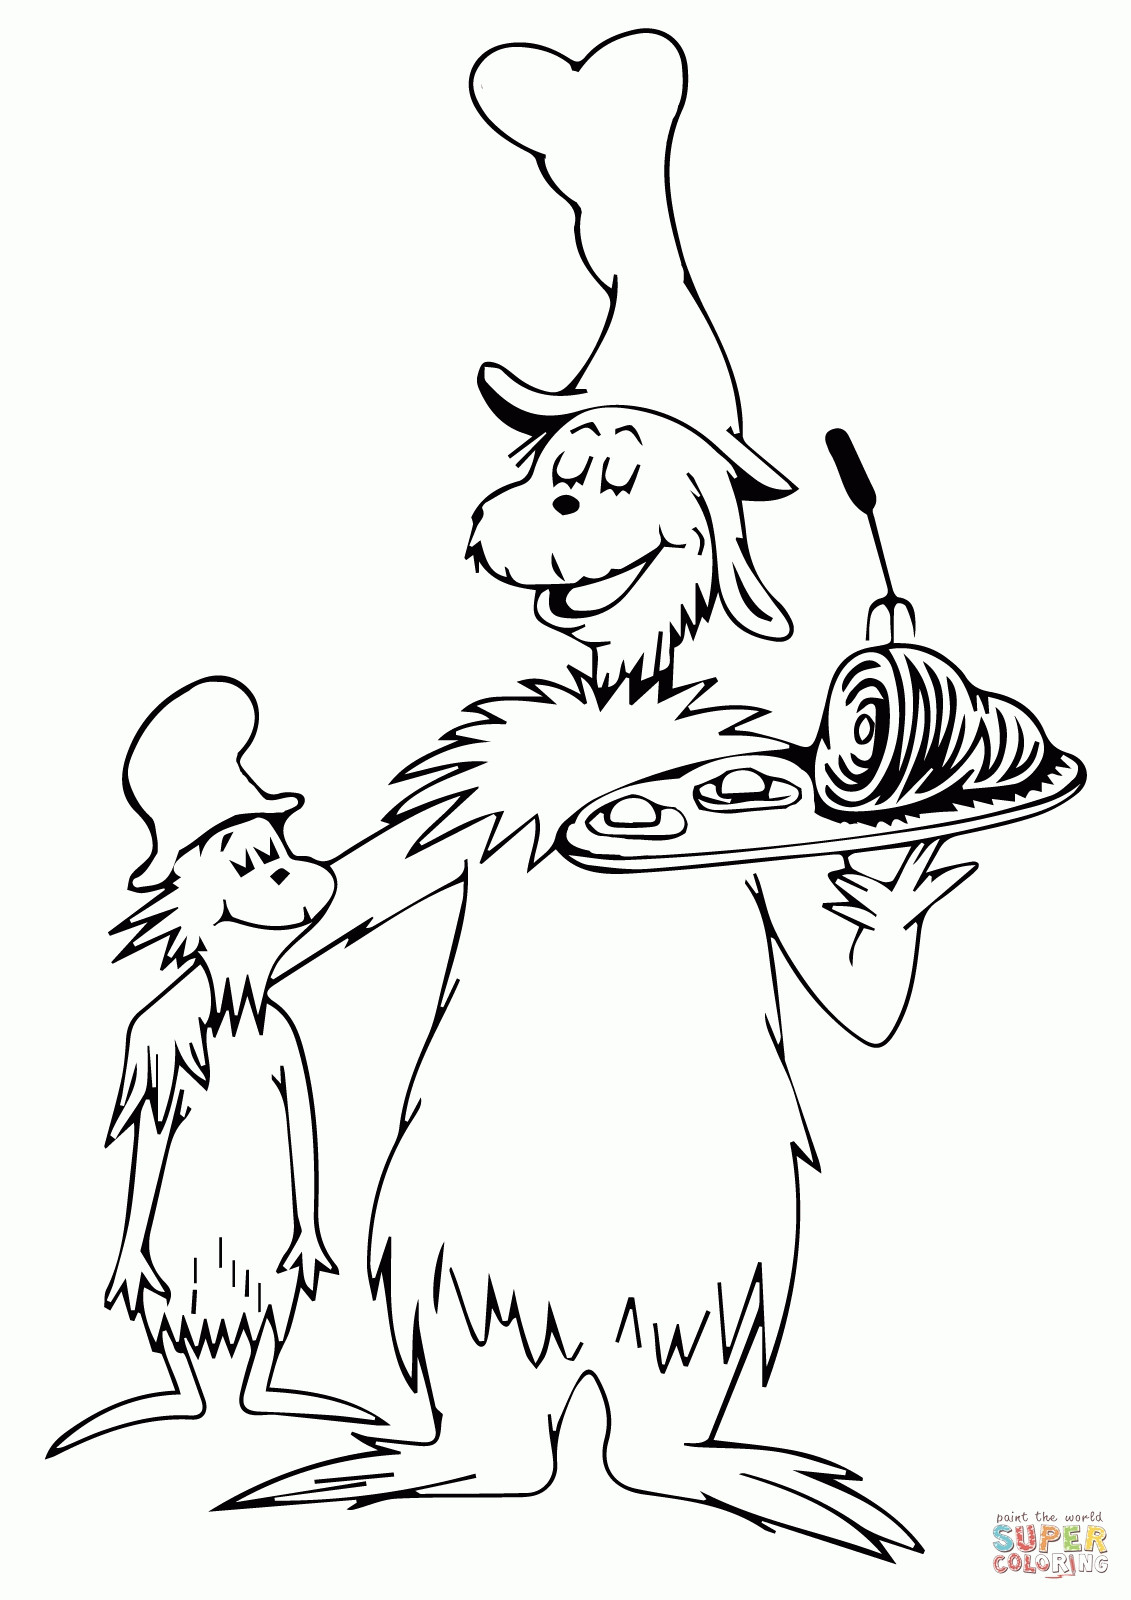 Dr.Seuss Coloring Pages Printable
 Free Dr Seuss Coloring Pages Printable Coloring Home